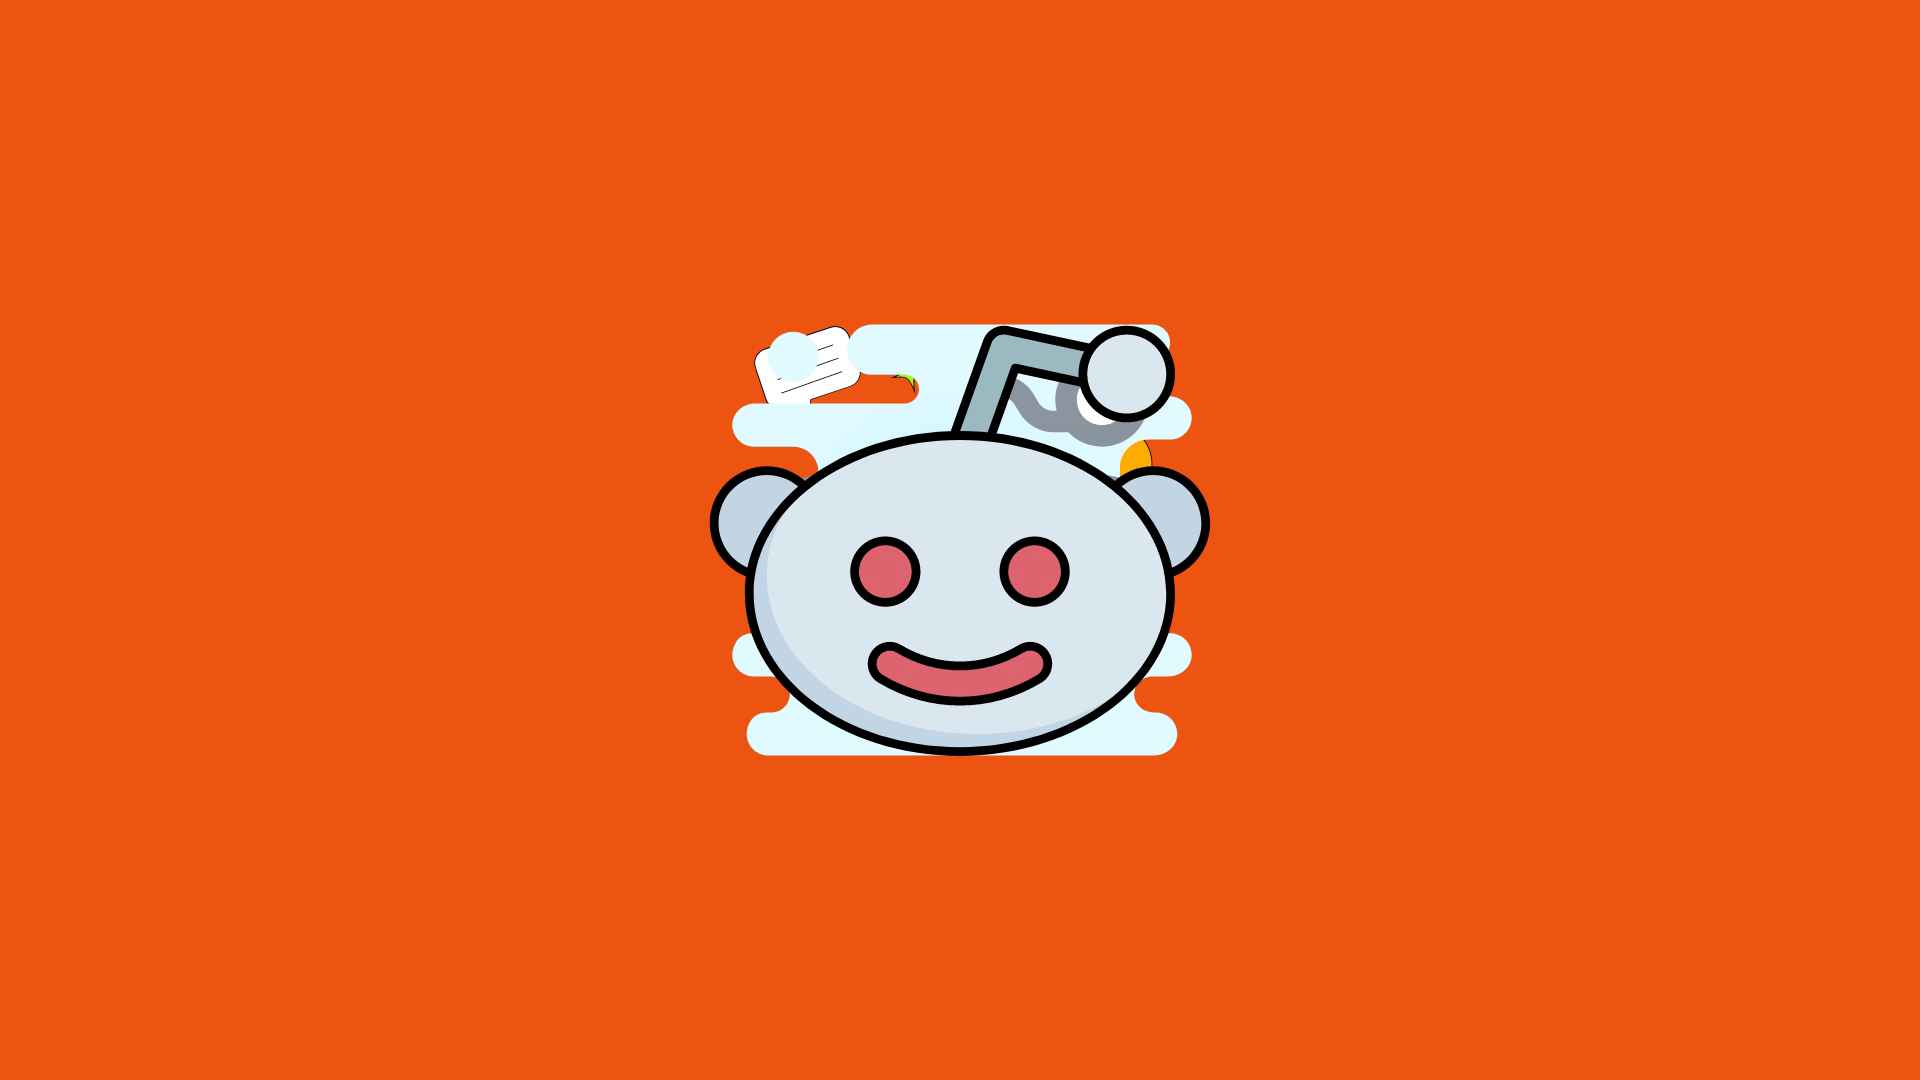 What are some ways to gain visibility or increase the reach of posts on Reddit?